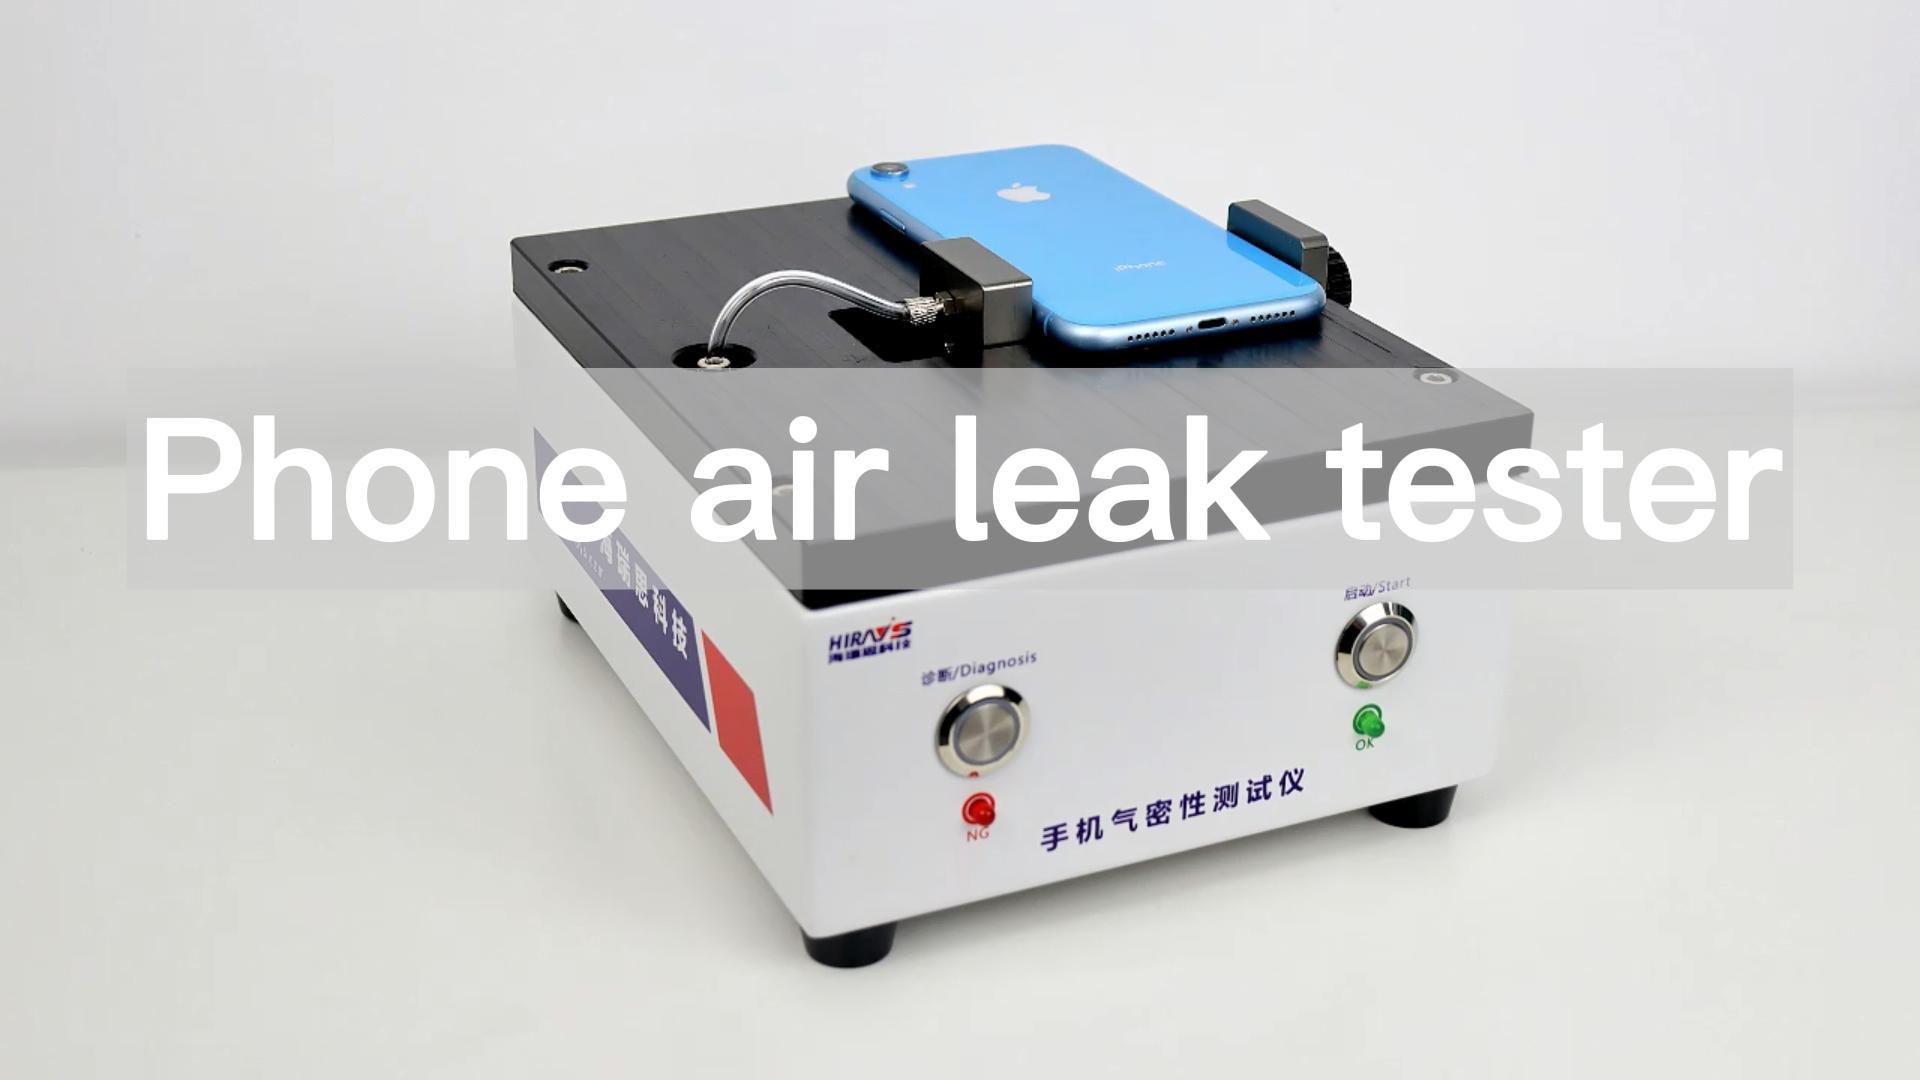 How to do the phone's air leak test?